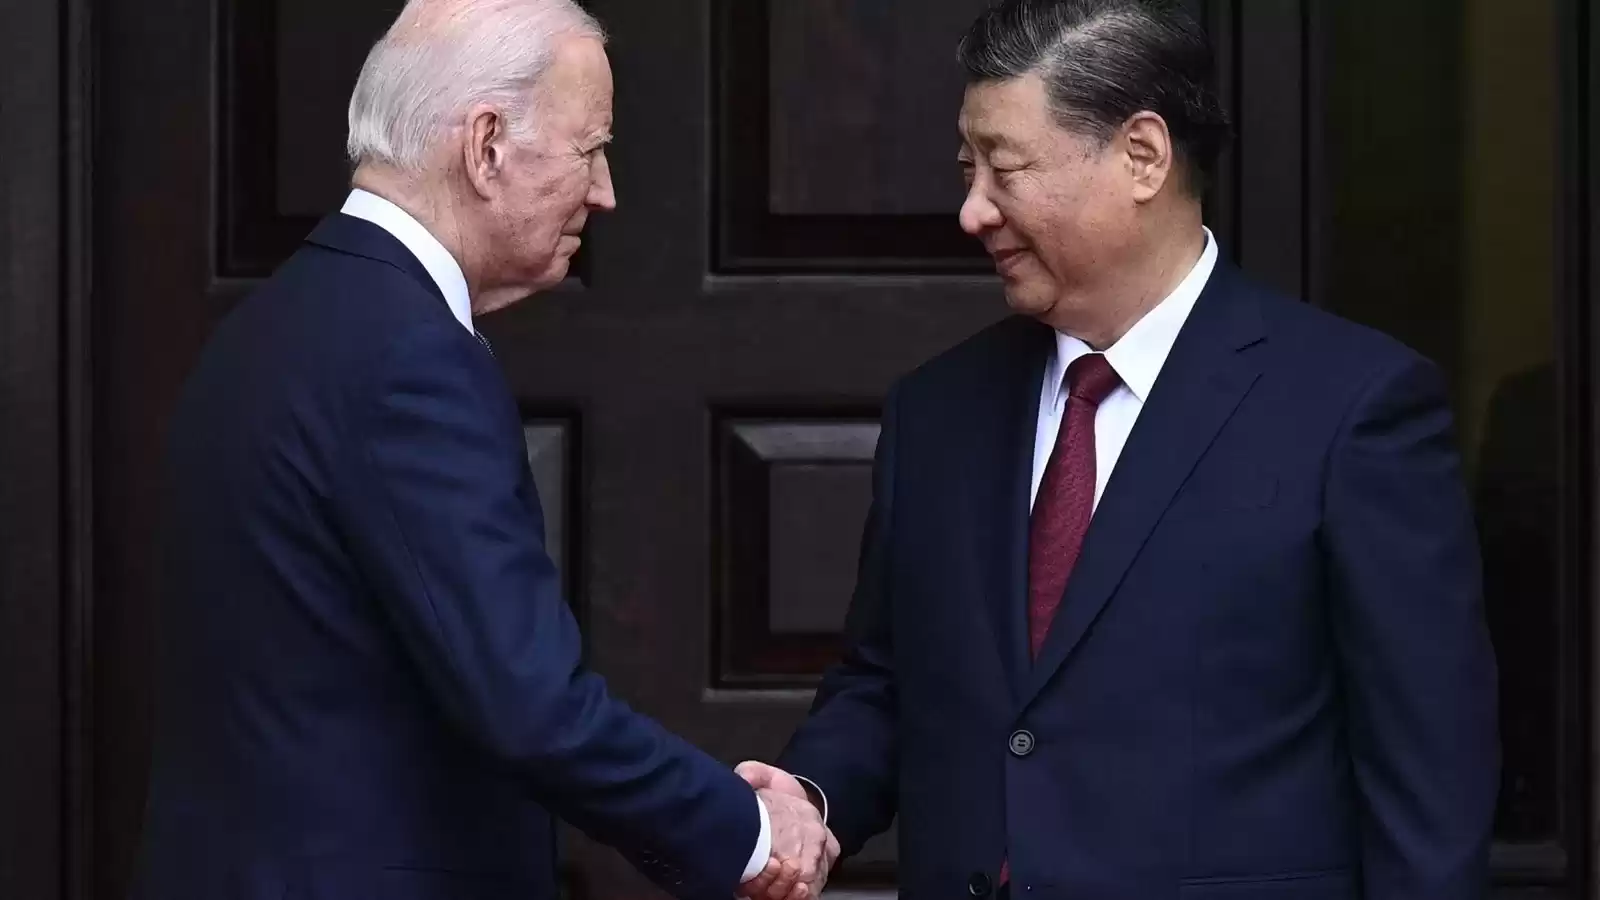 Xi Jinping ignores reporter question about trust in Biden